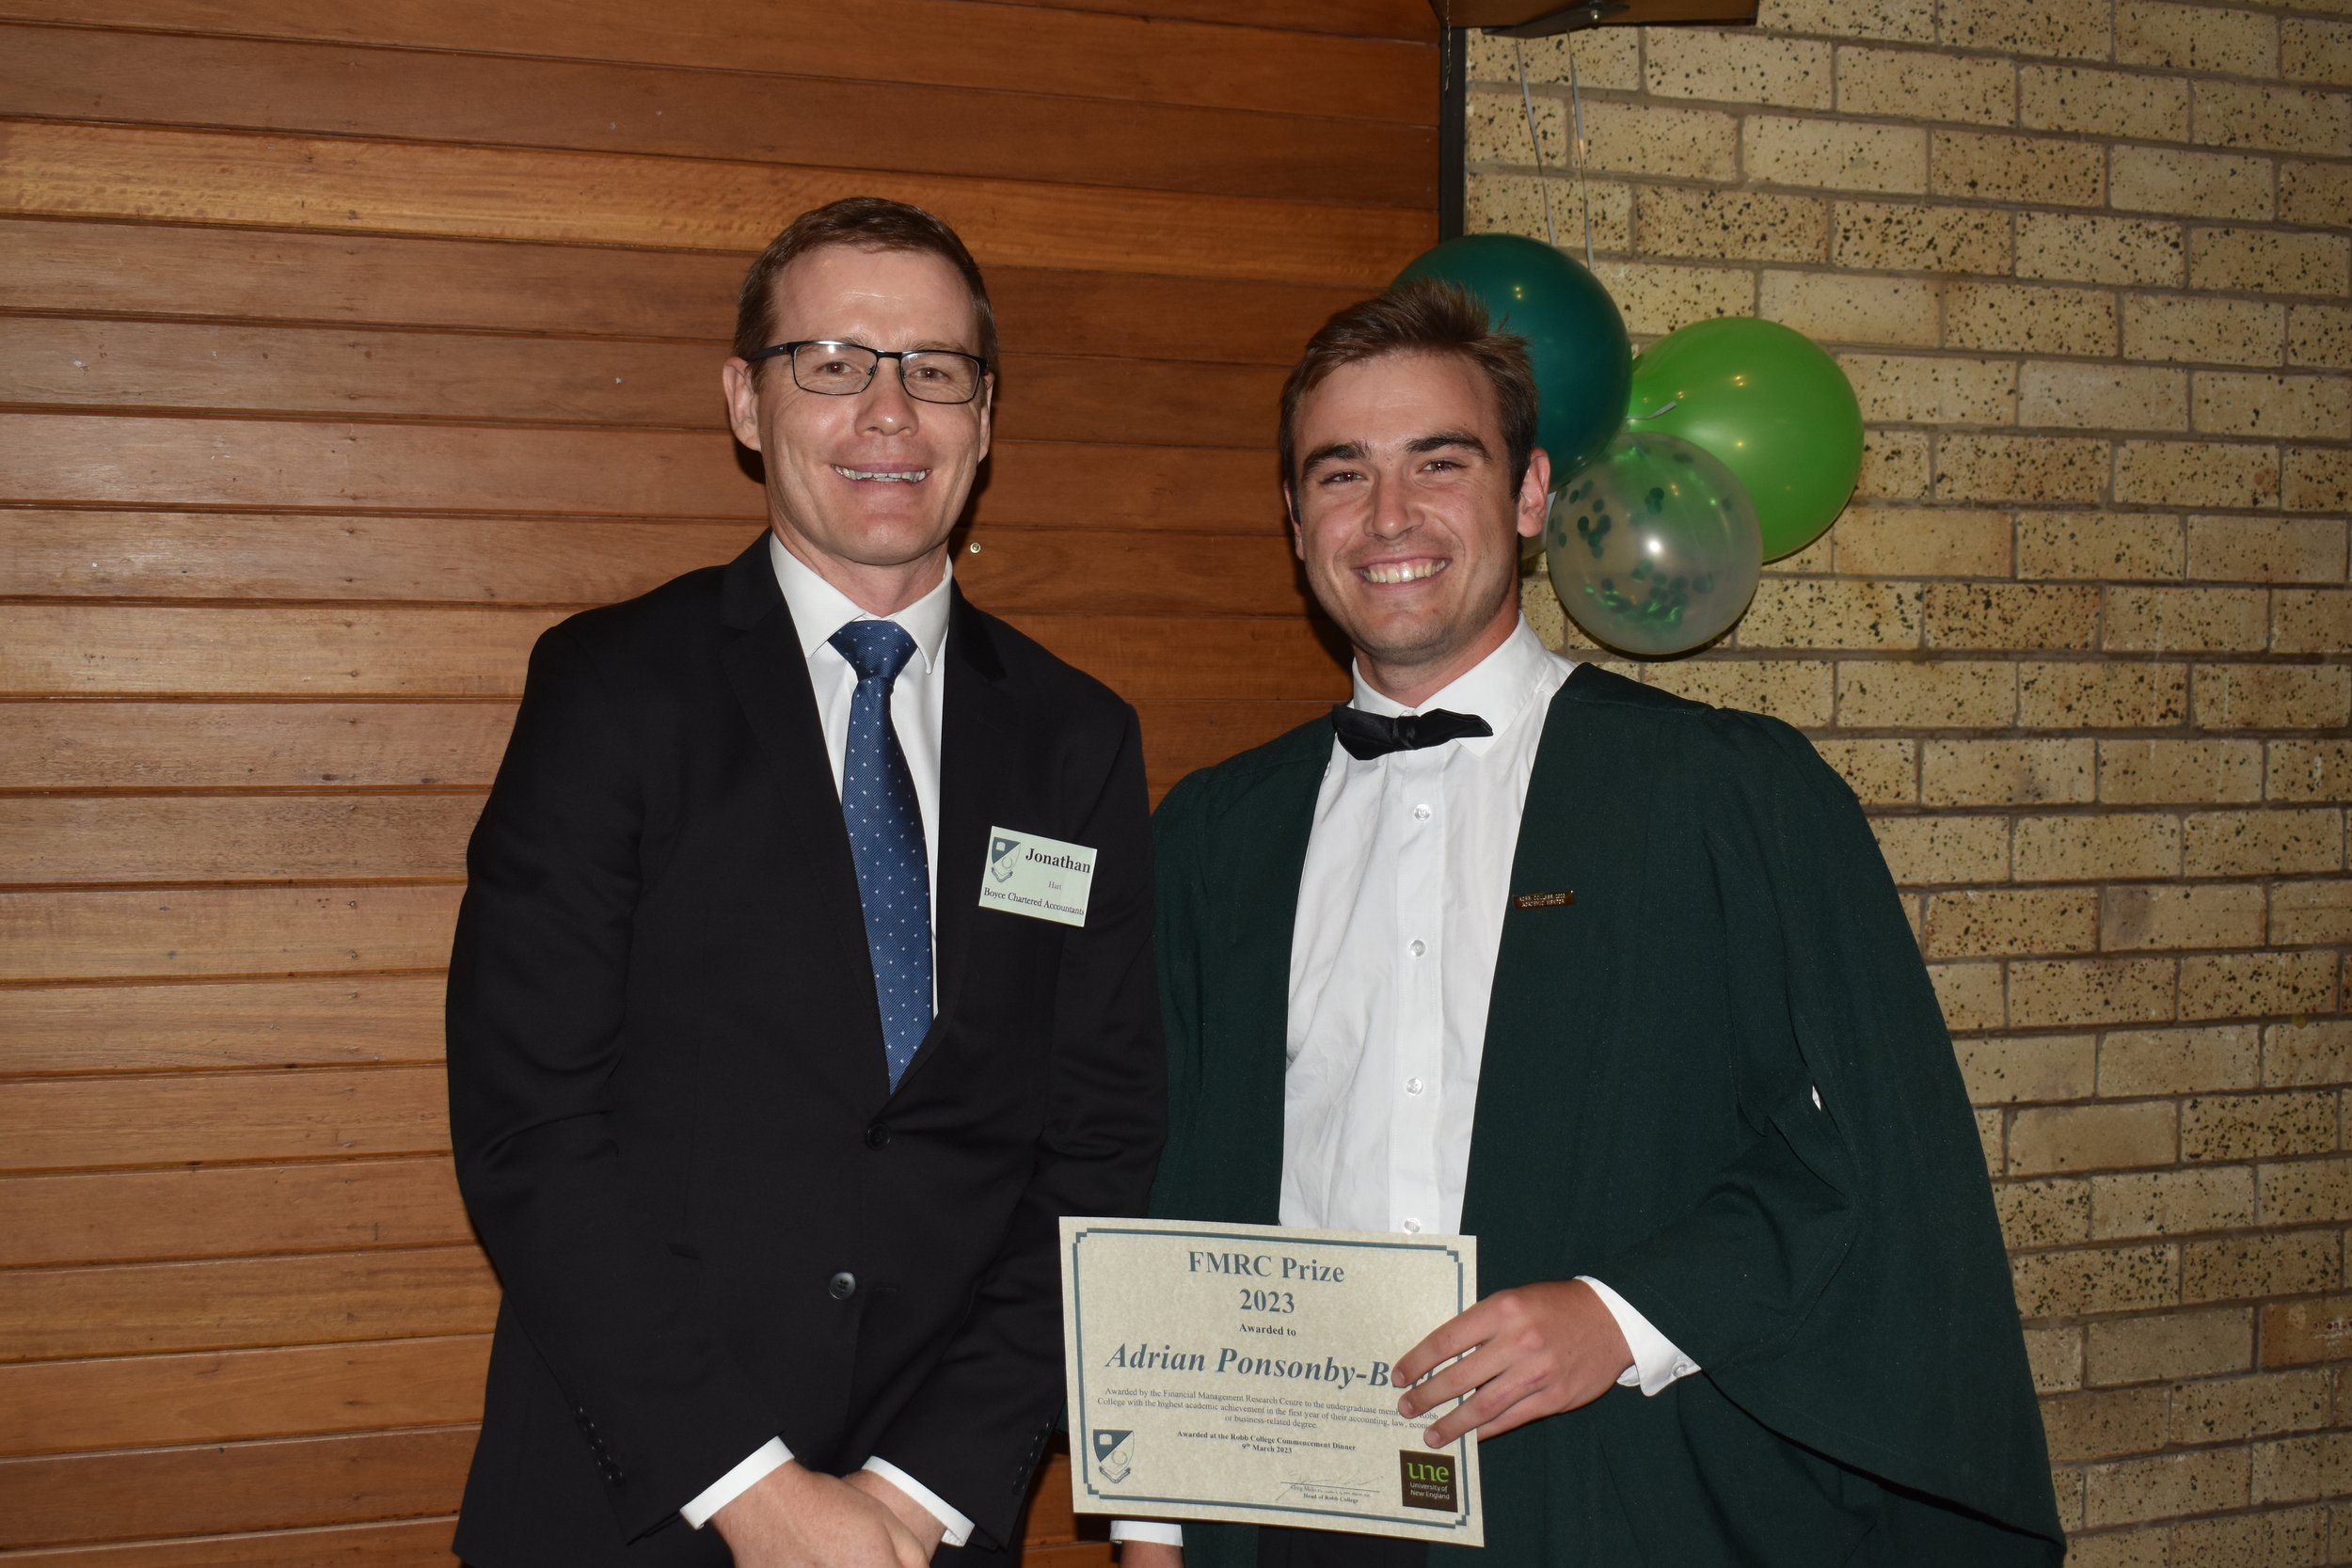 Jonathan Hart Director of Boyce Accountants presents FMRC Prize for academic excellence in 1st year Accounting/Law/Business/Economics to Adrian Ponsonby-Burl B. Agri-Business.